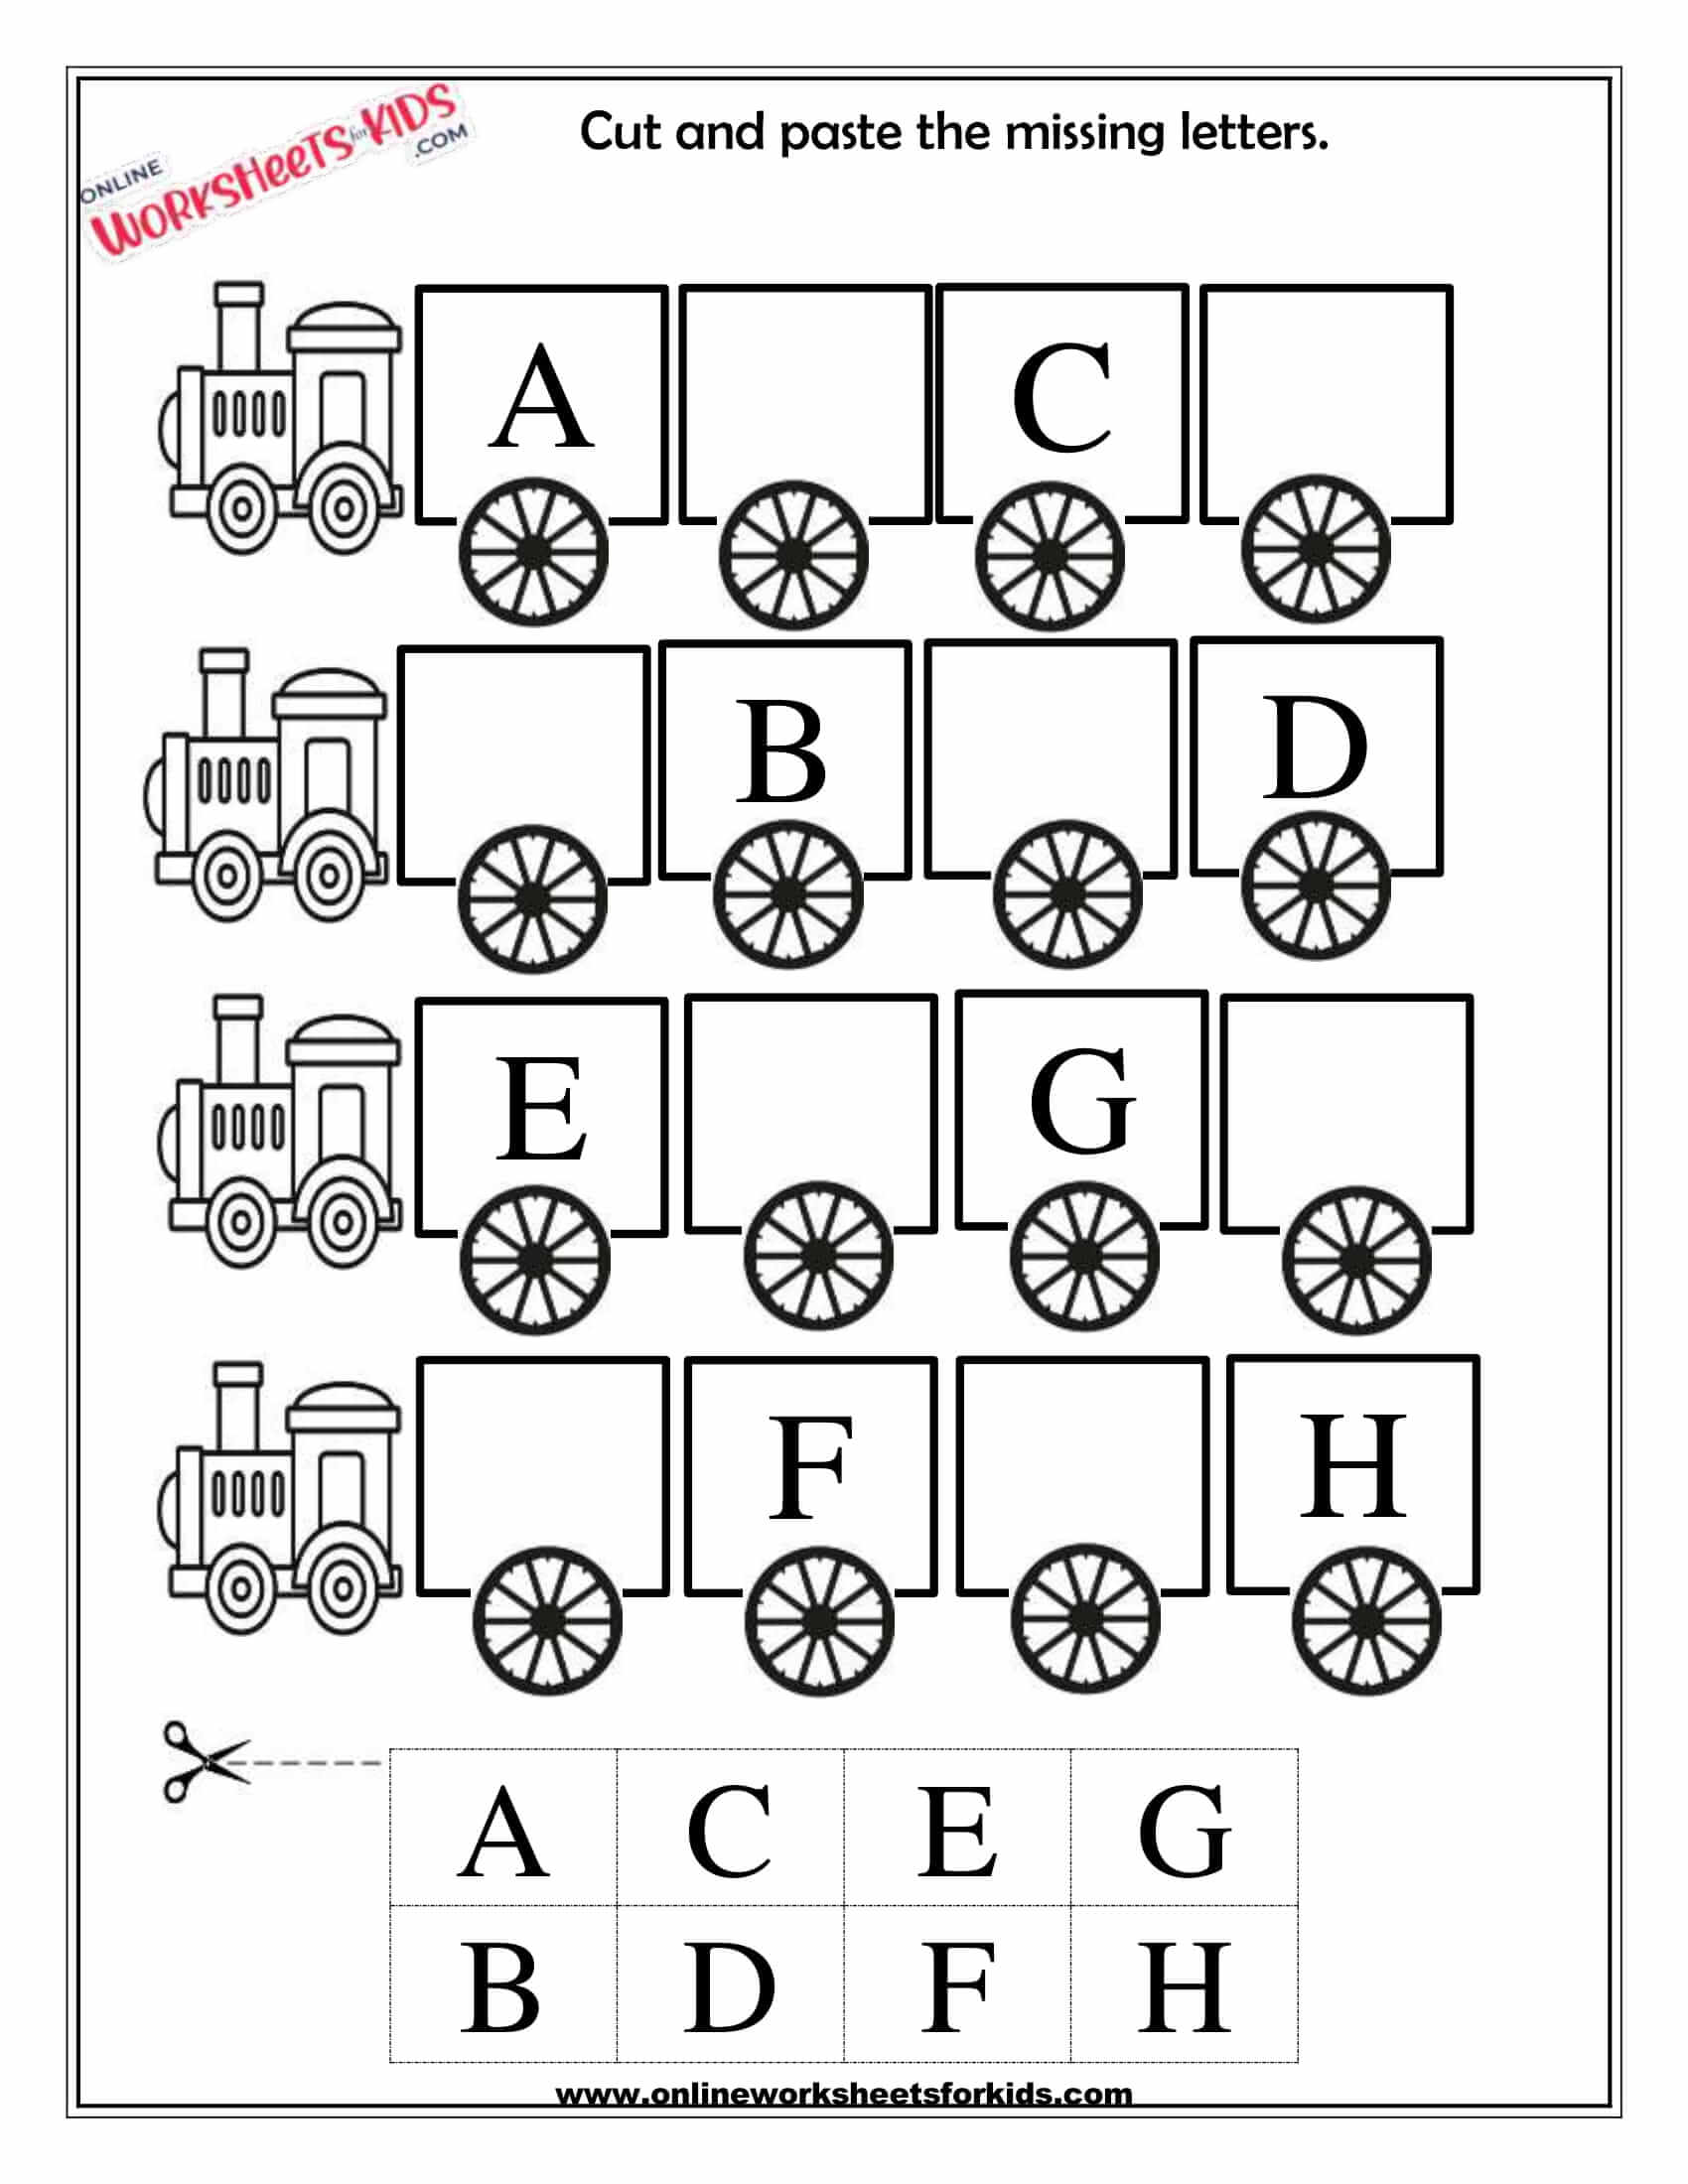 Free Printable Cut And Paste Letter Worksheets